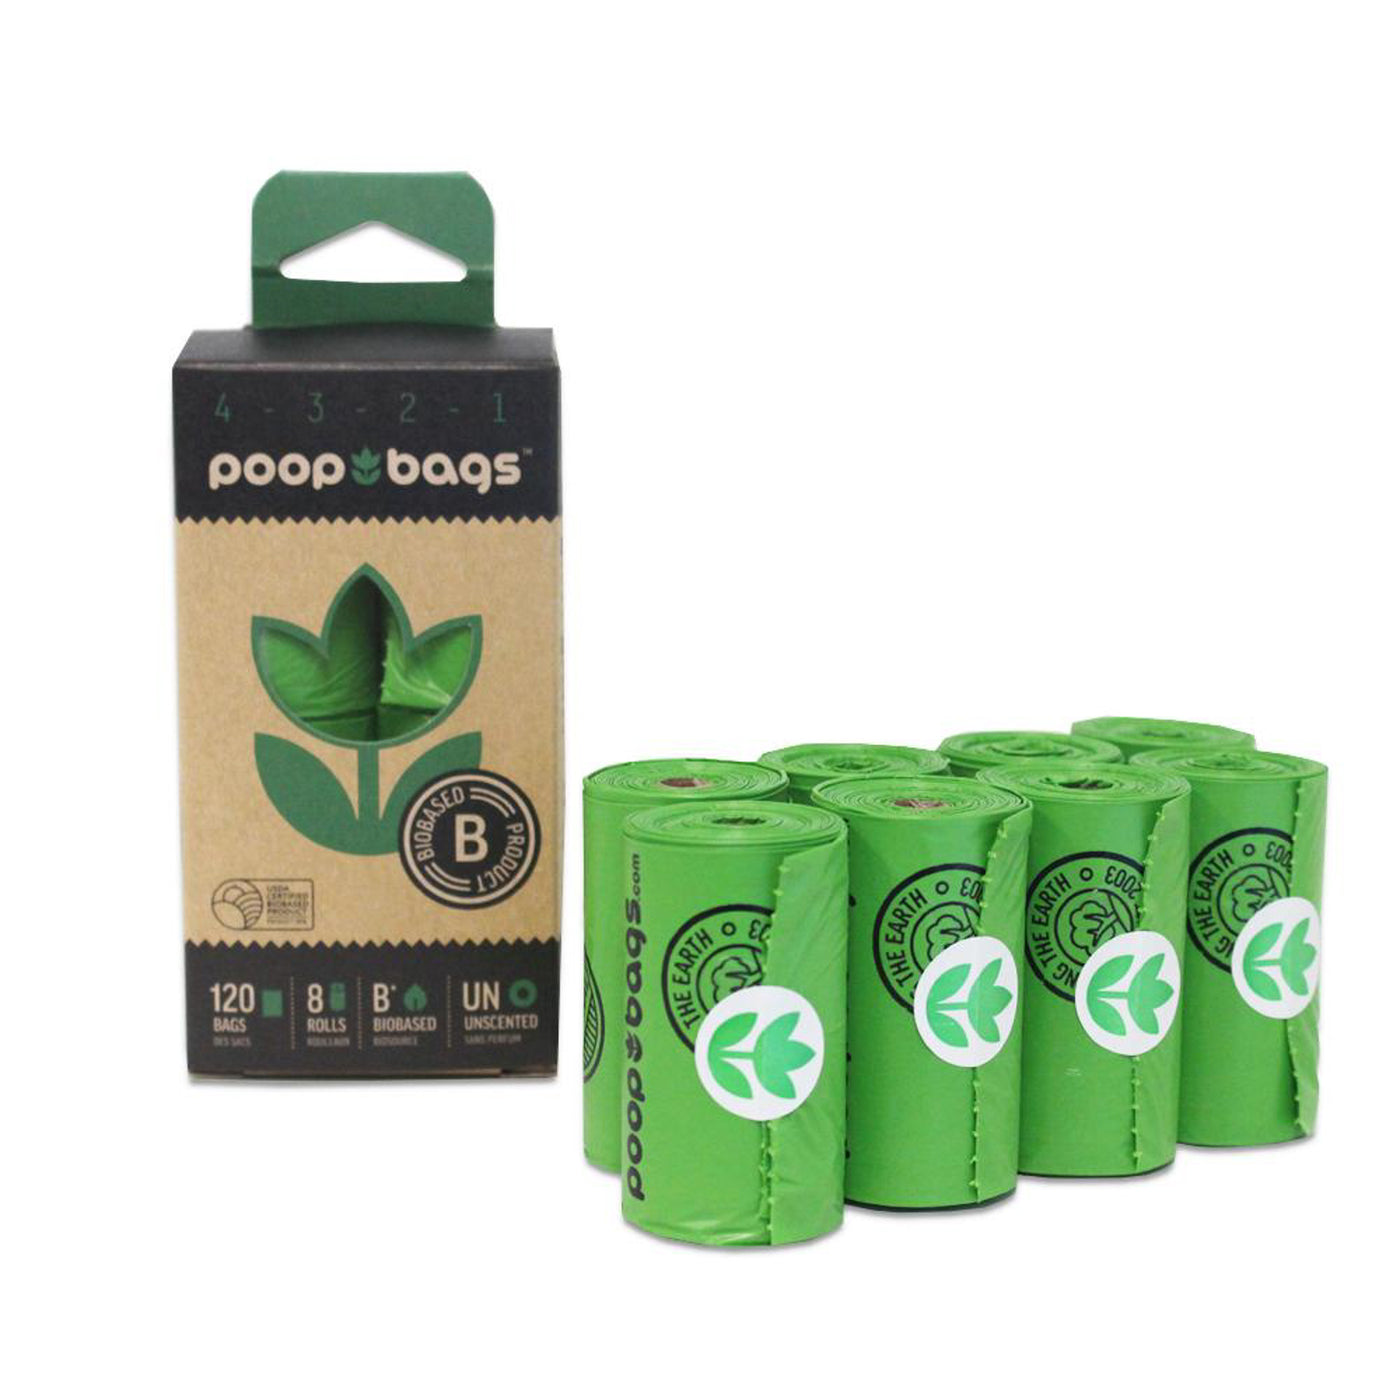 The Original Poop Bags countdown rolls in 8 pack box and 8 rolls in front